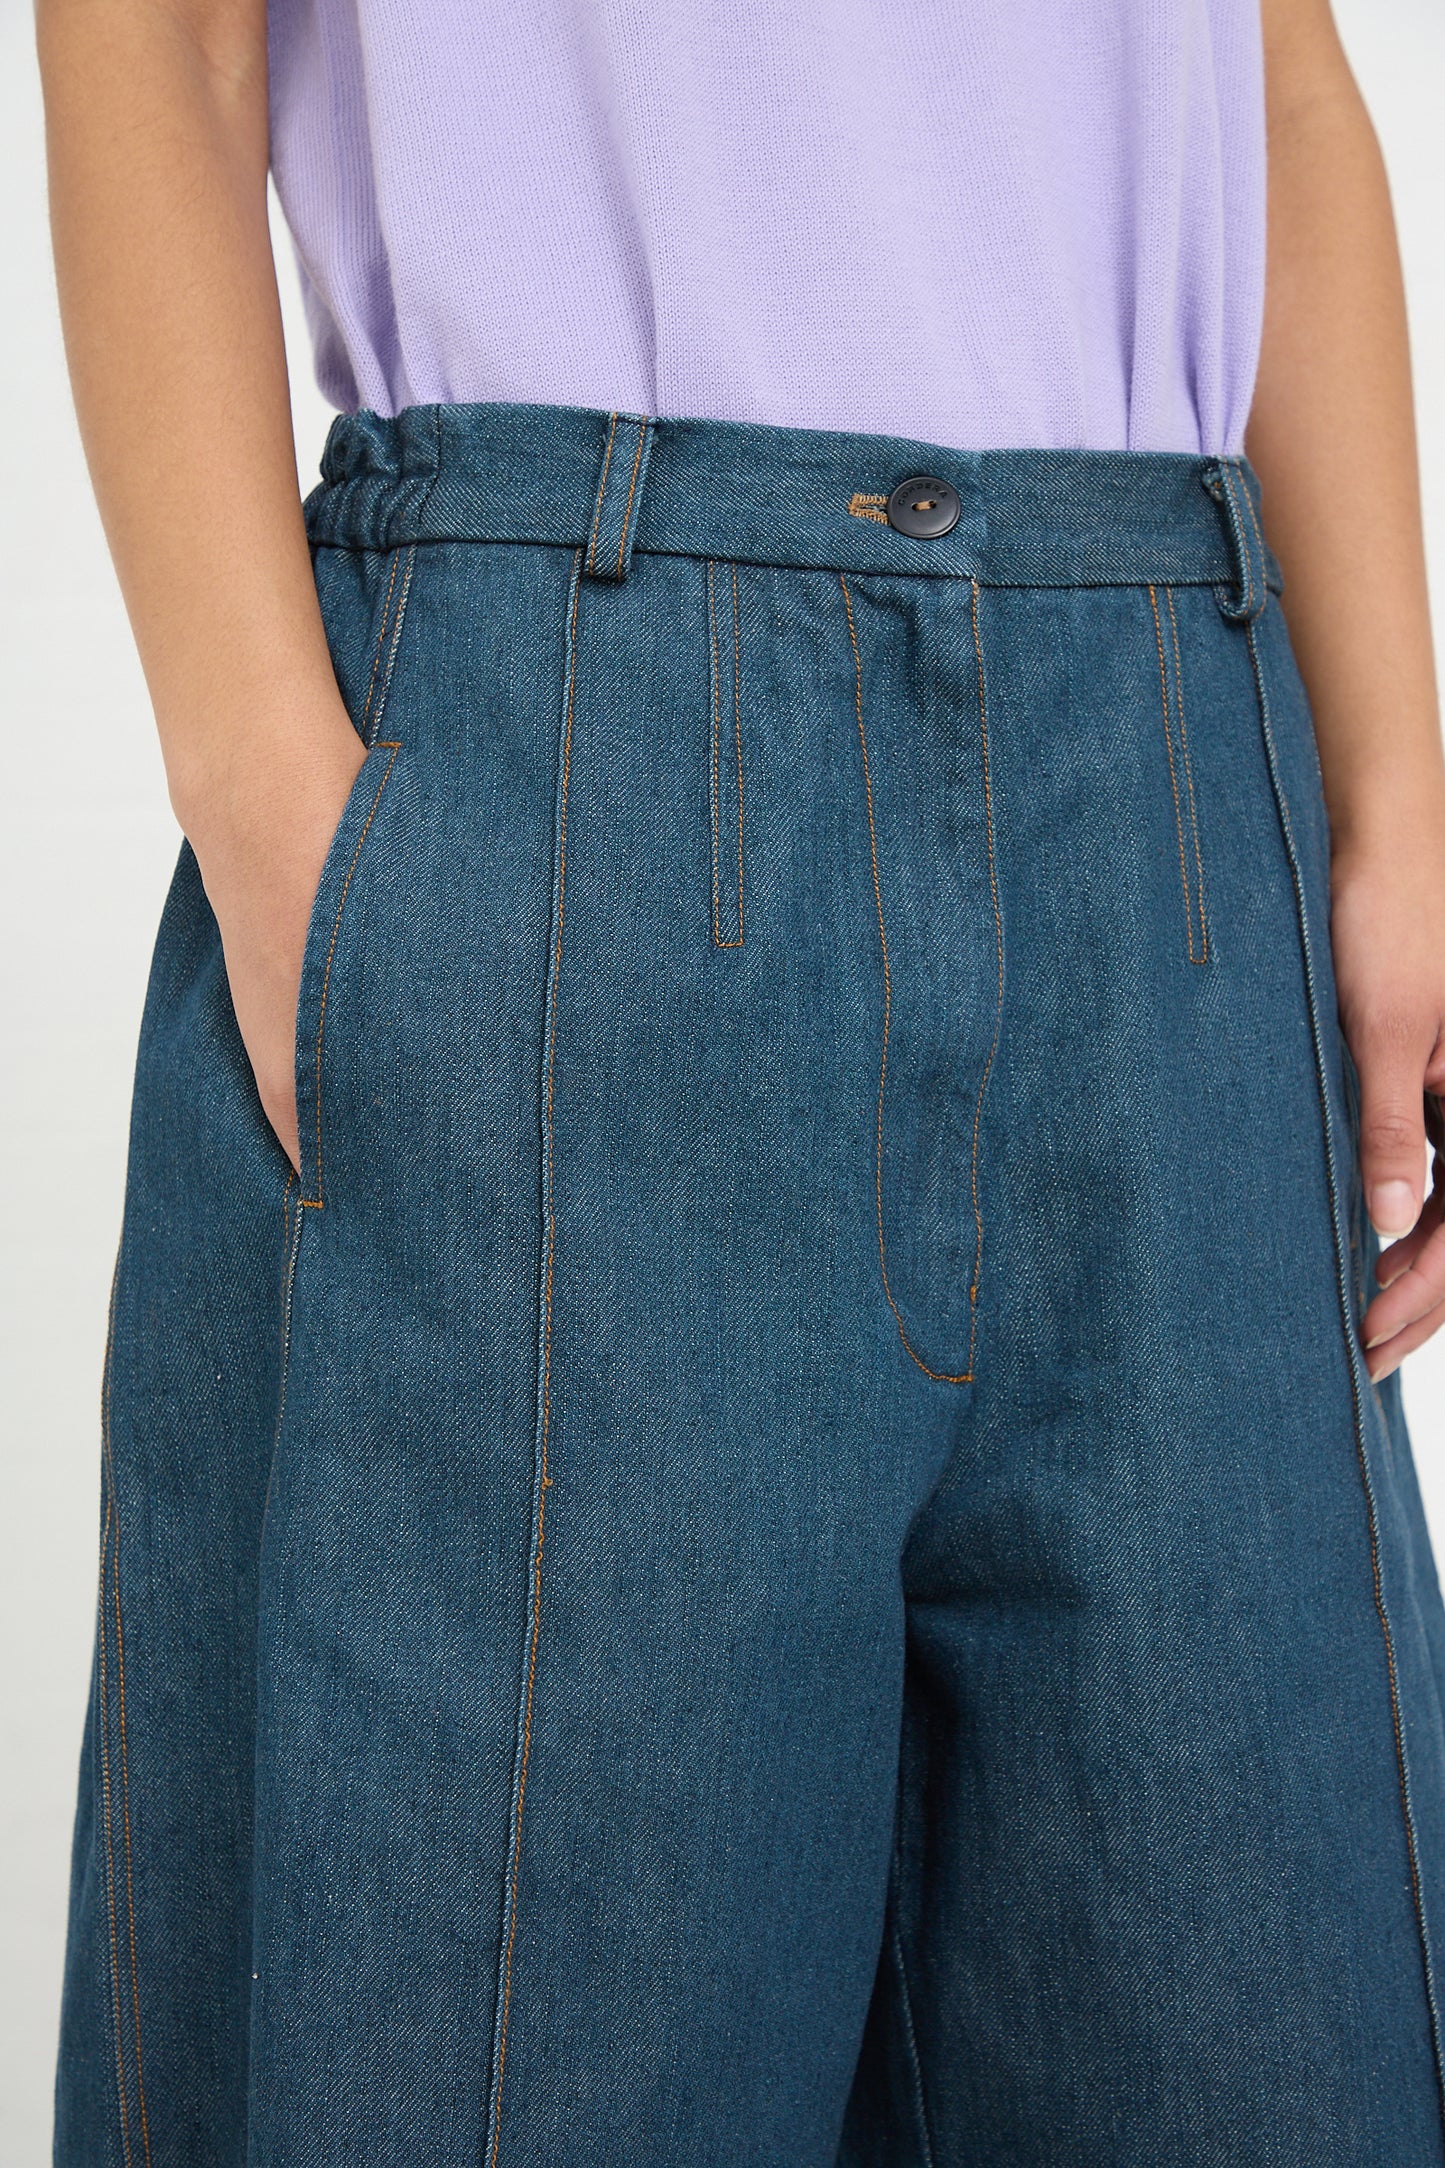 Close-up of a person wearing a lilac top and Cordera's Frontal Seam Curved Pant in Denim jeans with a button and stitching details.